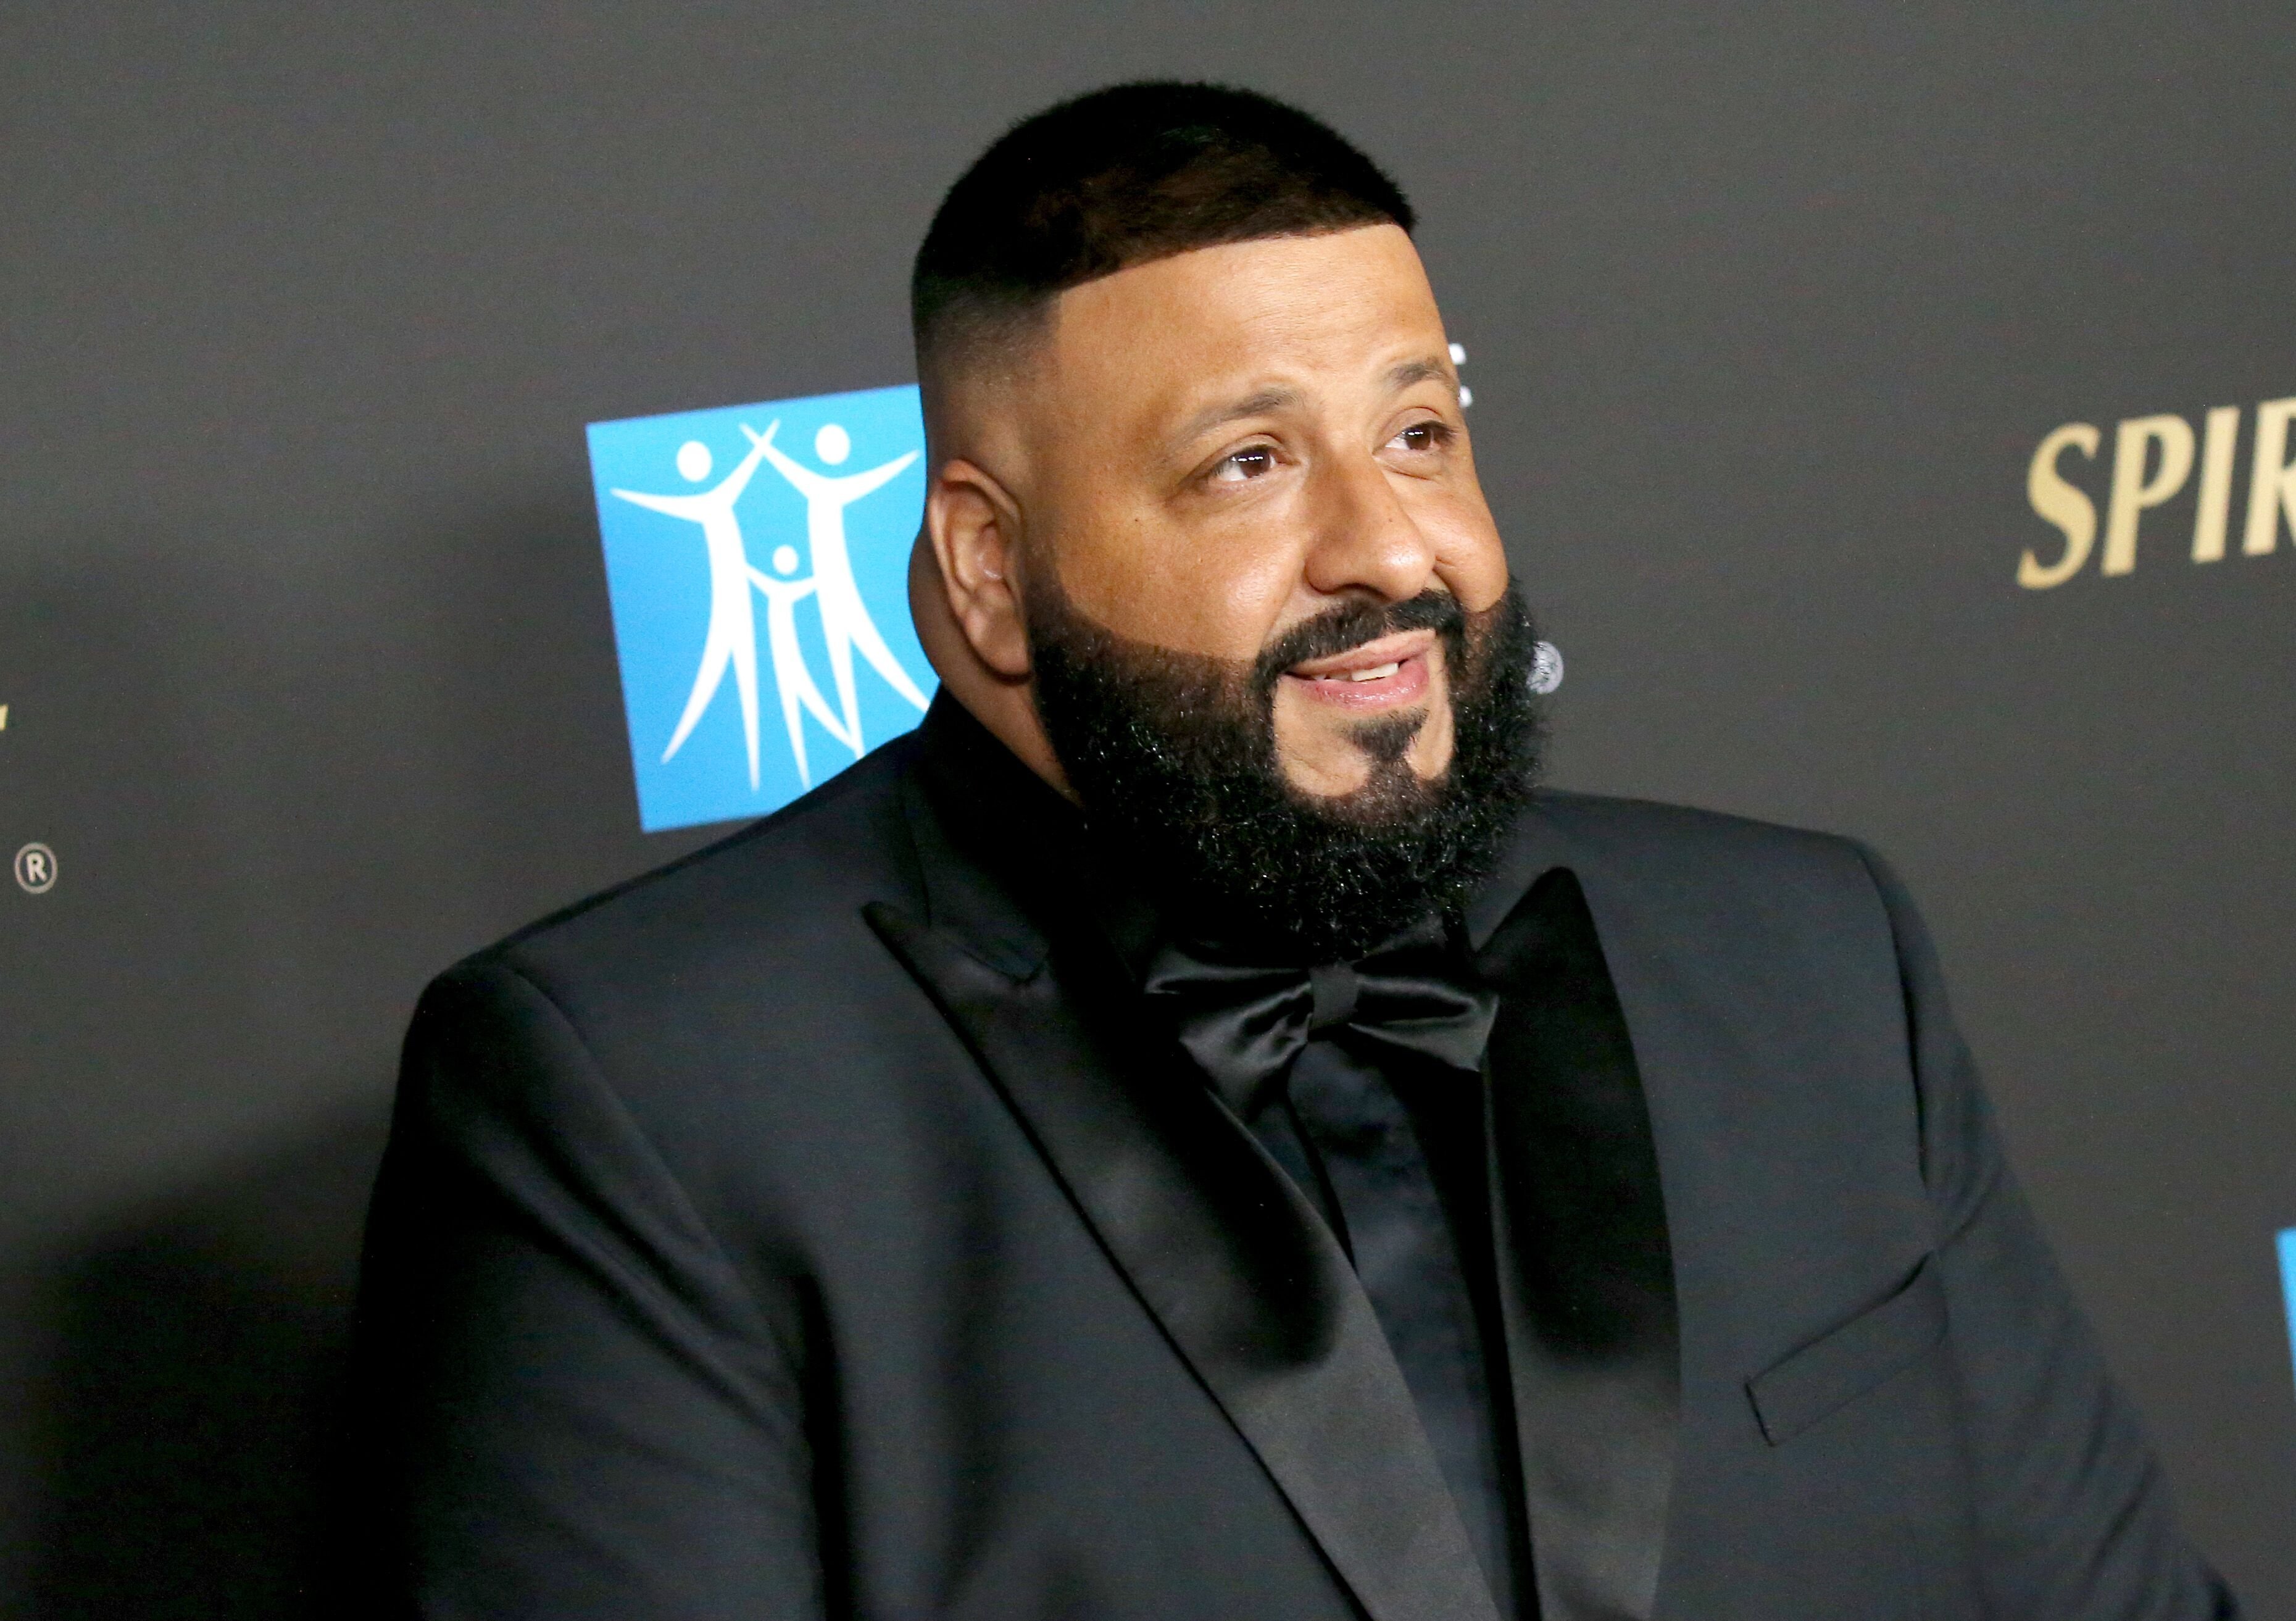 DJ Khaled attends the City Of Hope's Spirit of Life 2019 Gala held at the Barker Hangar on October 10, 2019  | Photo: Getty Images